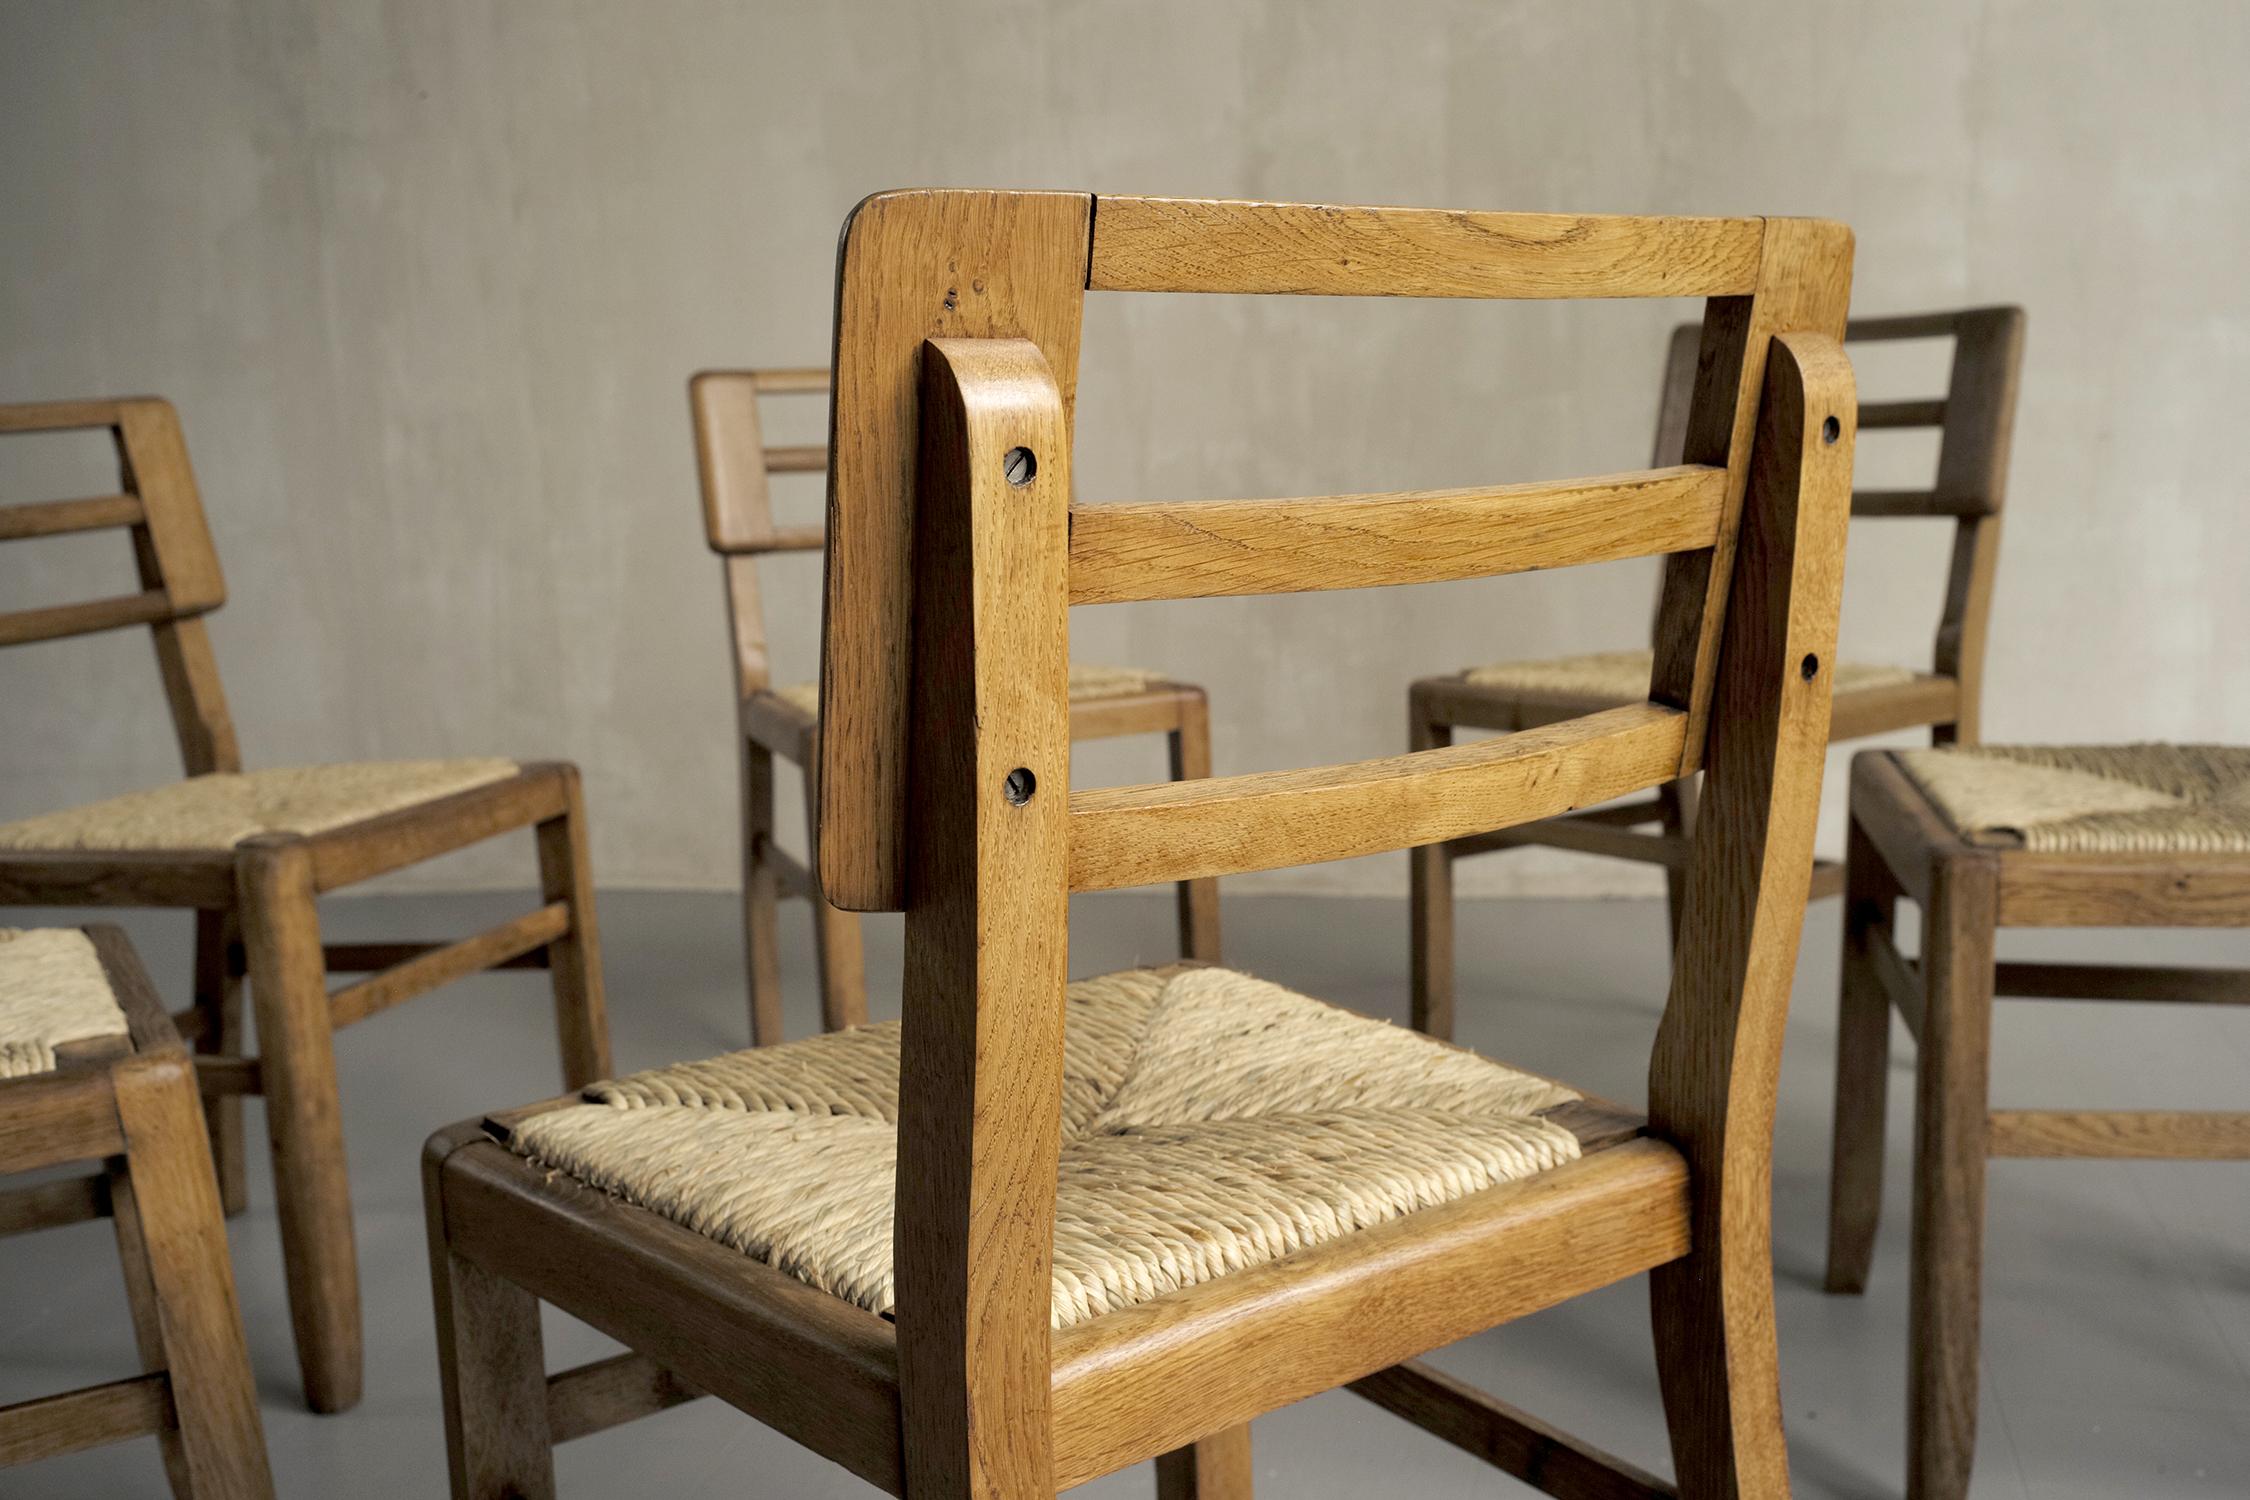 Pierre Cruège, Set of 6 Straw Chairs, France, 1950 In Good Condition For Sale In Catonvielle, FR